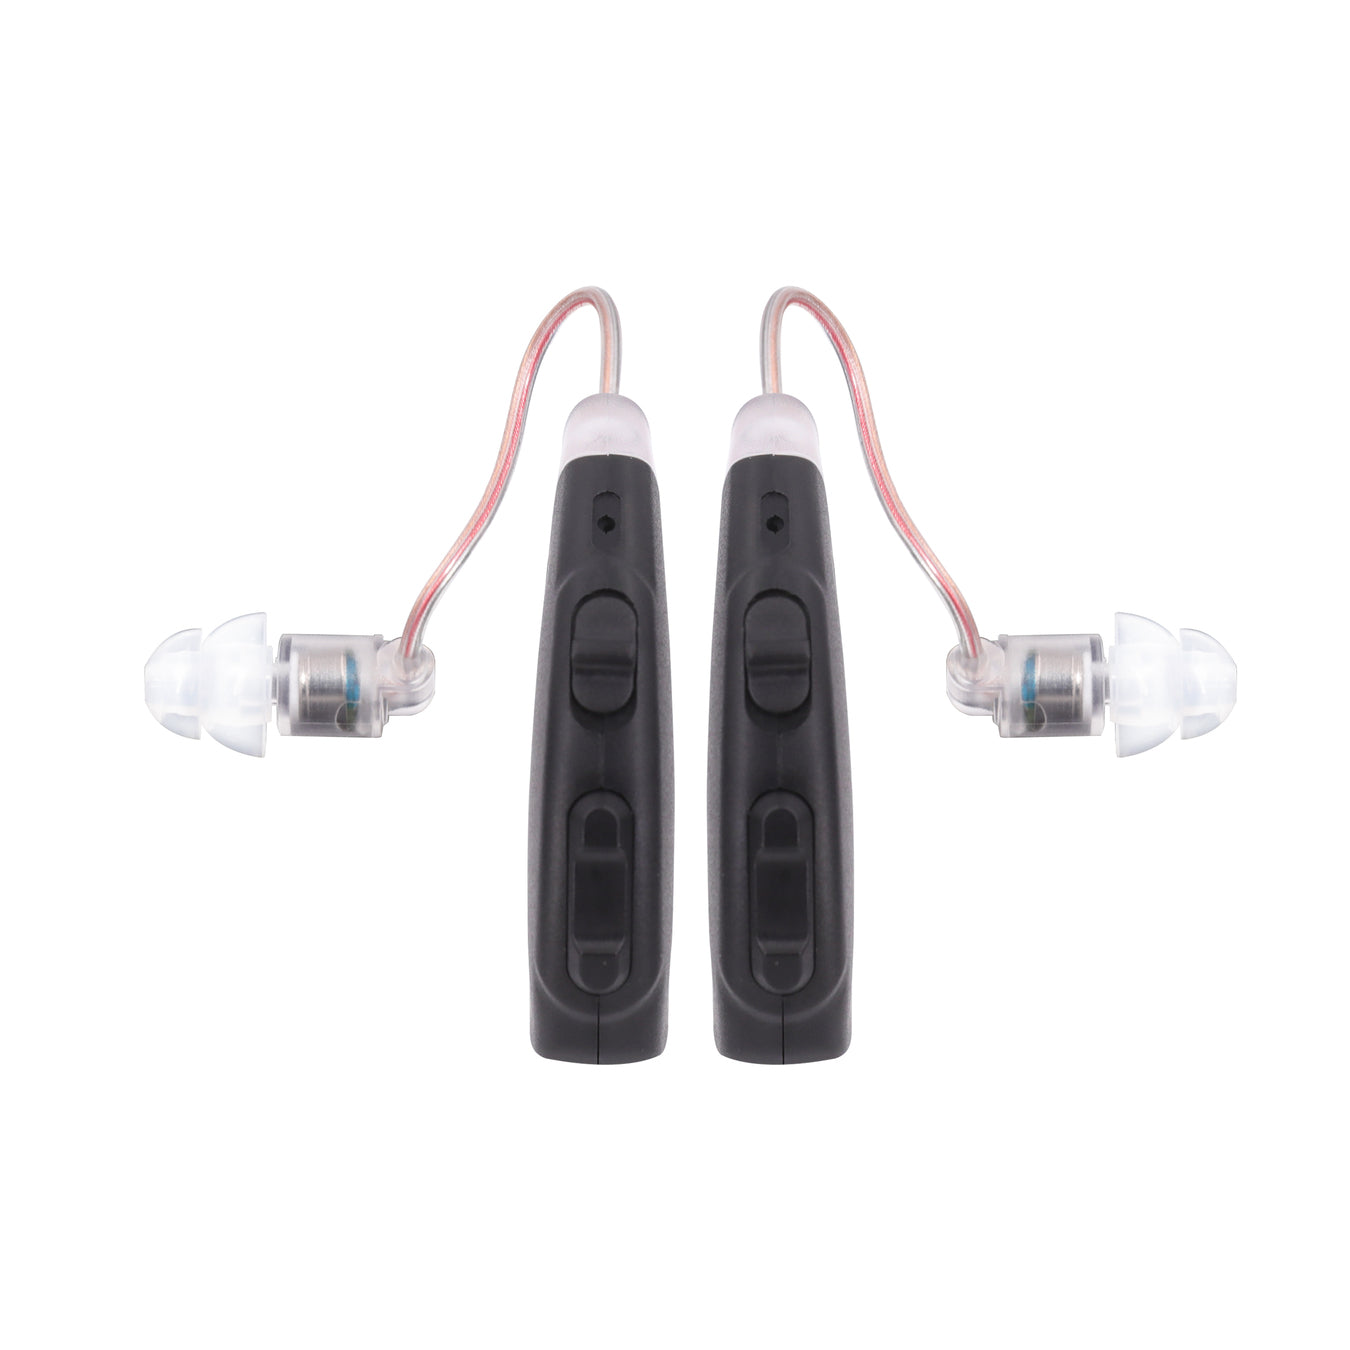 Fisdemo B Bluetooth Hearing Aids for Seniors Adults to Enjoy Hand-free Phone Calls with More Than 30 Hours Longtime Use